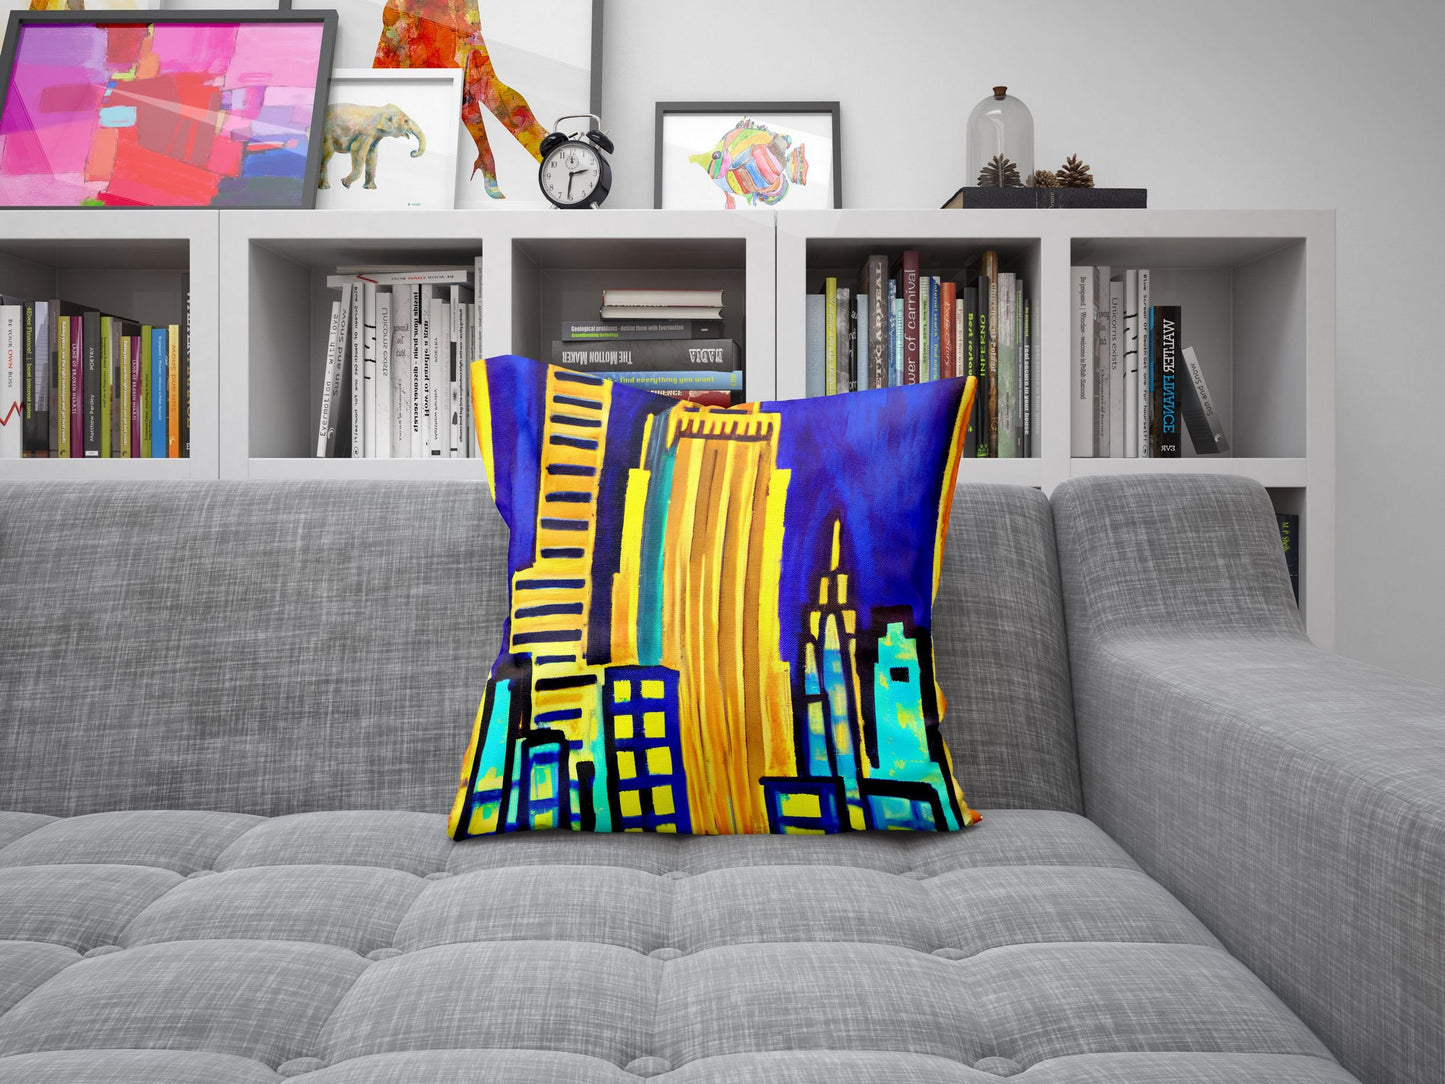 Empire State Building At Night, Tapestry Pillows, Animal Pillow, Comfortable, Colorful Pillow Case, Modern Pillow, 20X20 Pillow Cover